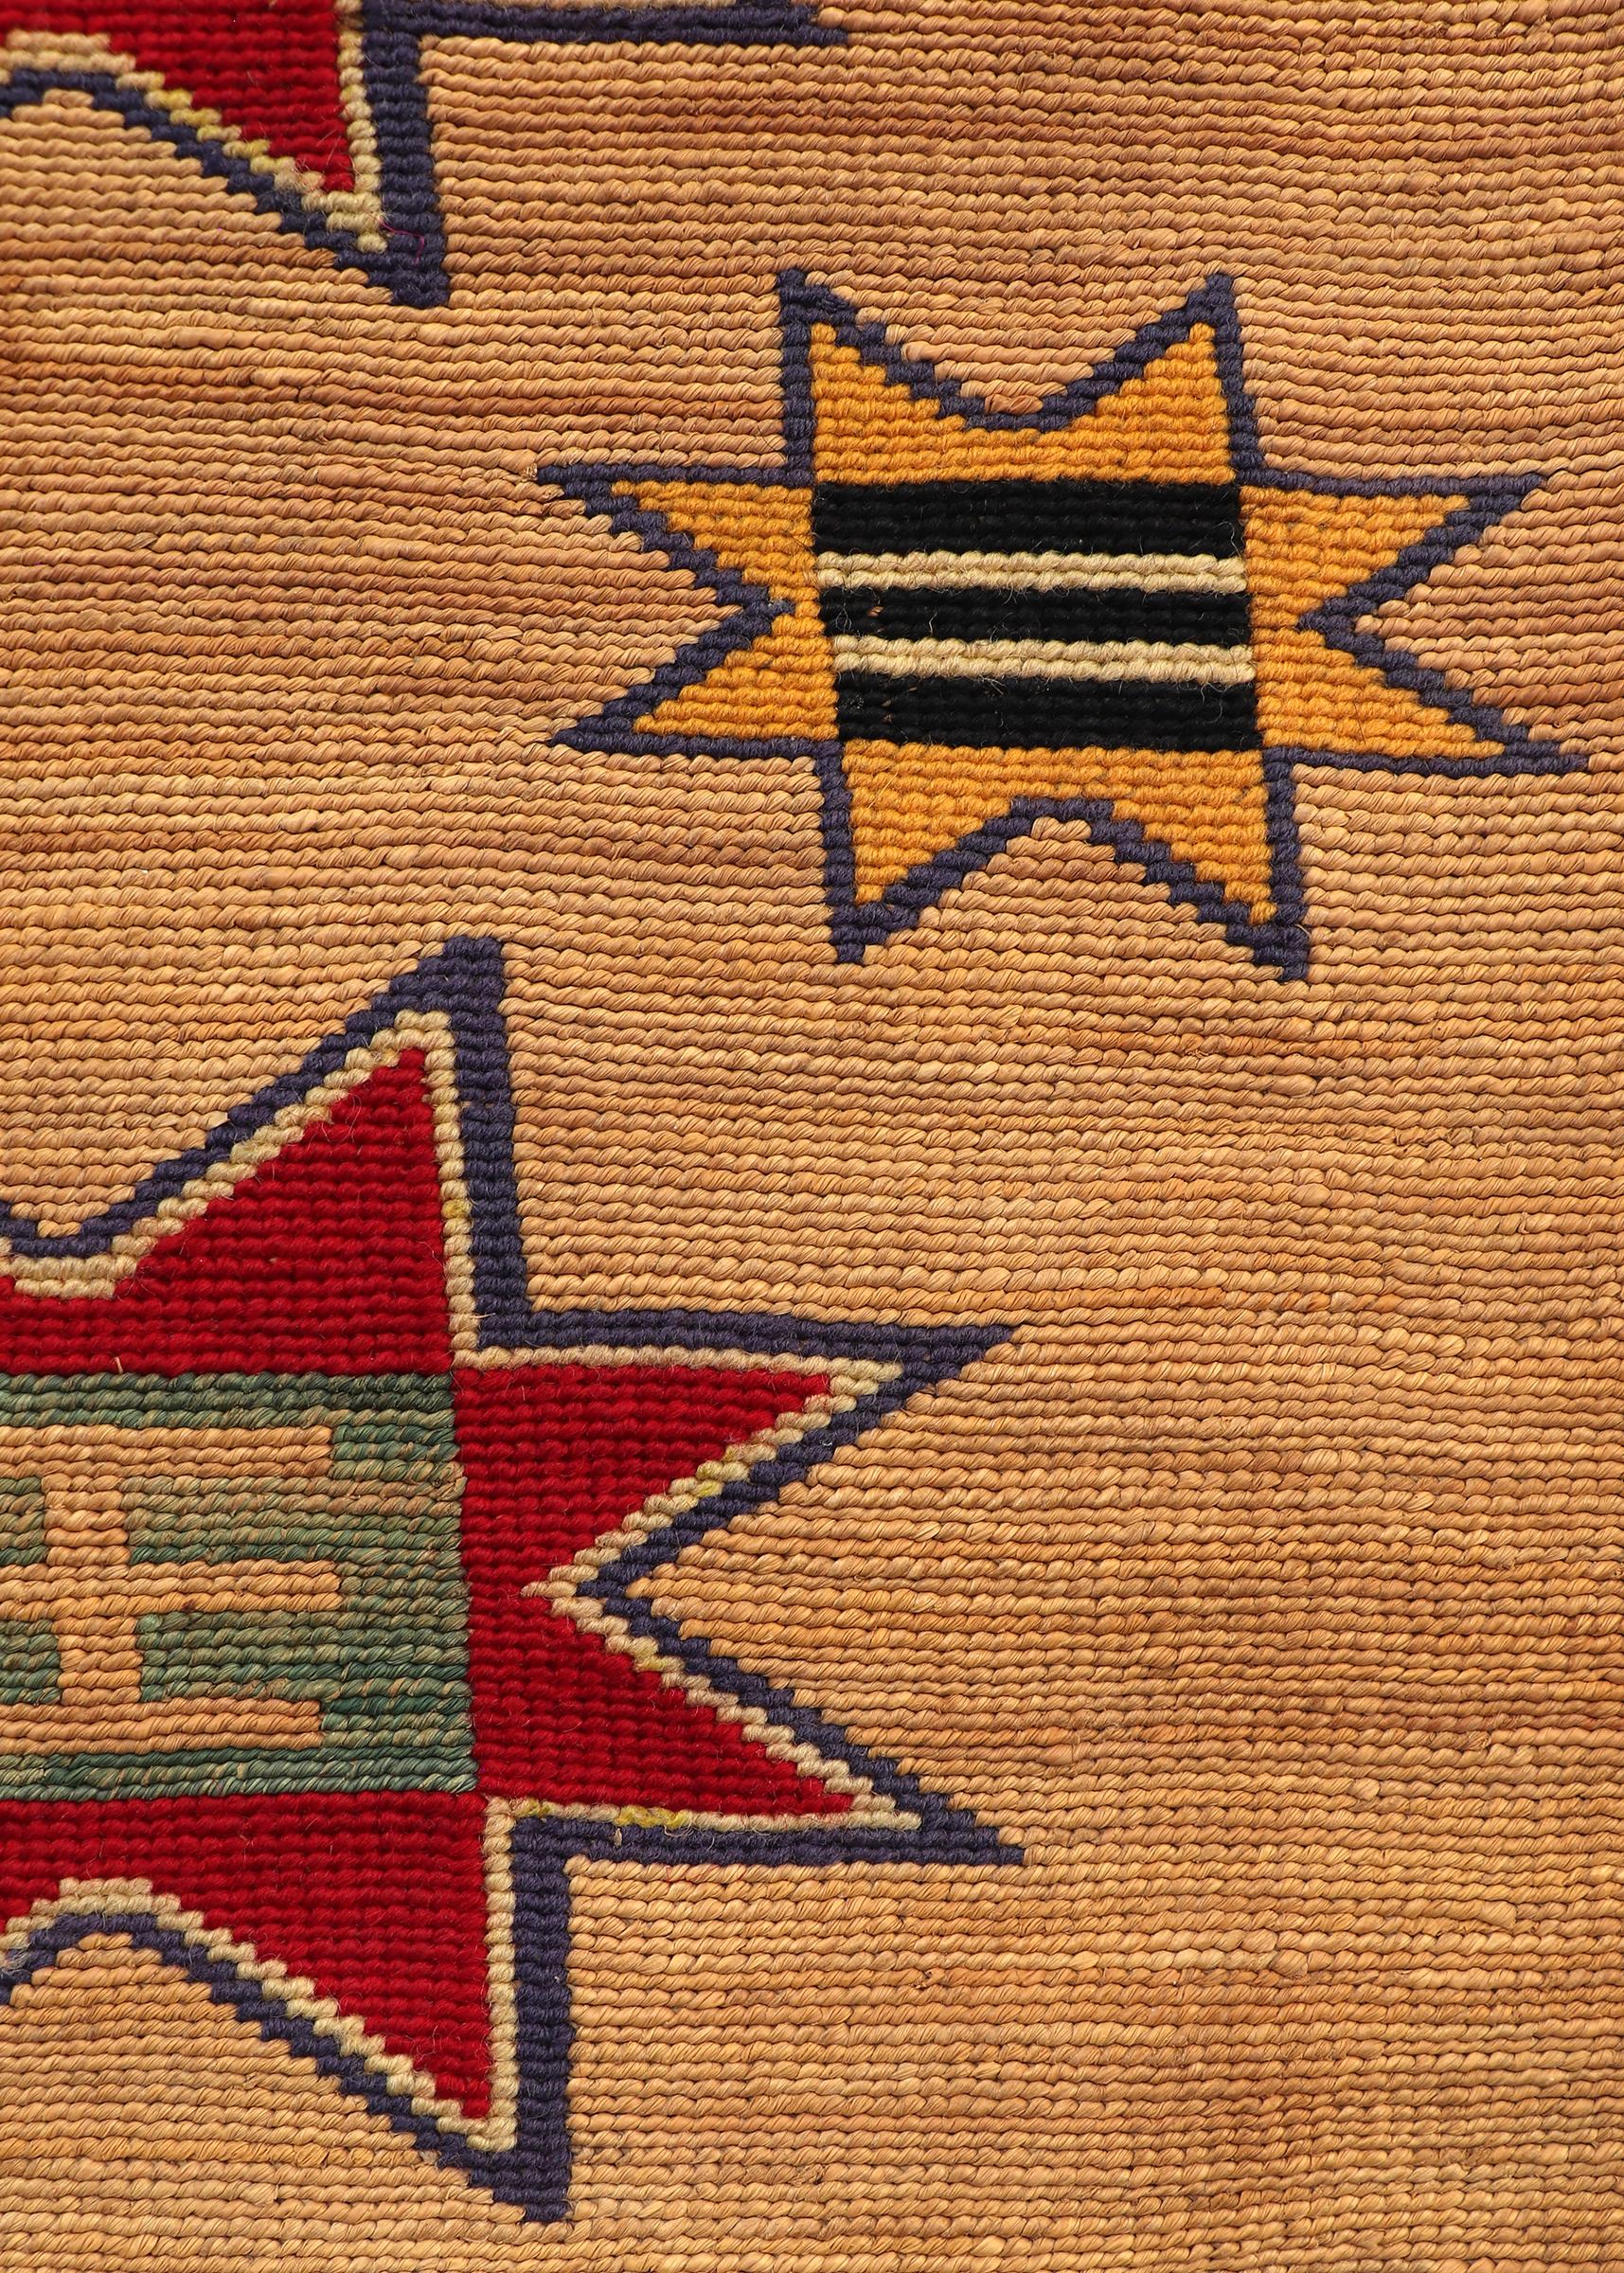 Dyed 1890s Plateau Cornhusk Bag with Blue, Red, and Yellow Geometric Designs